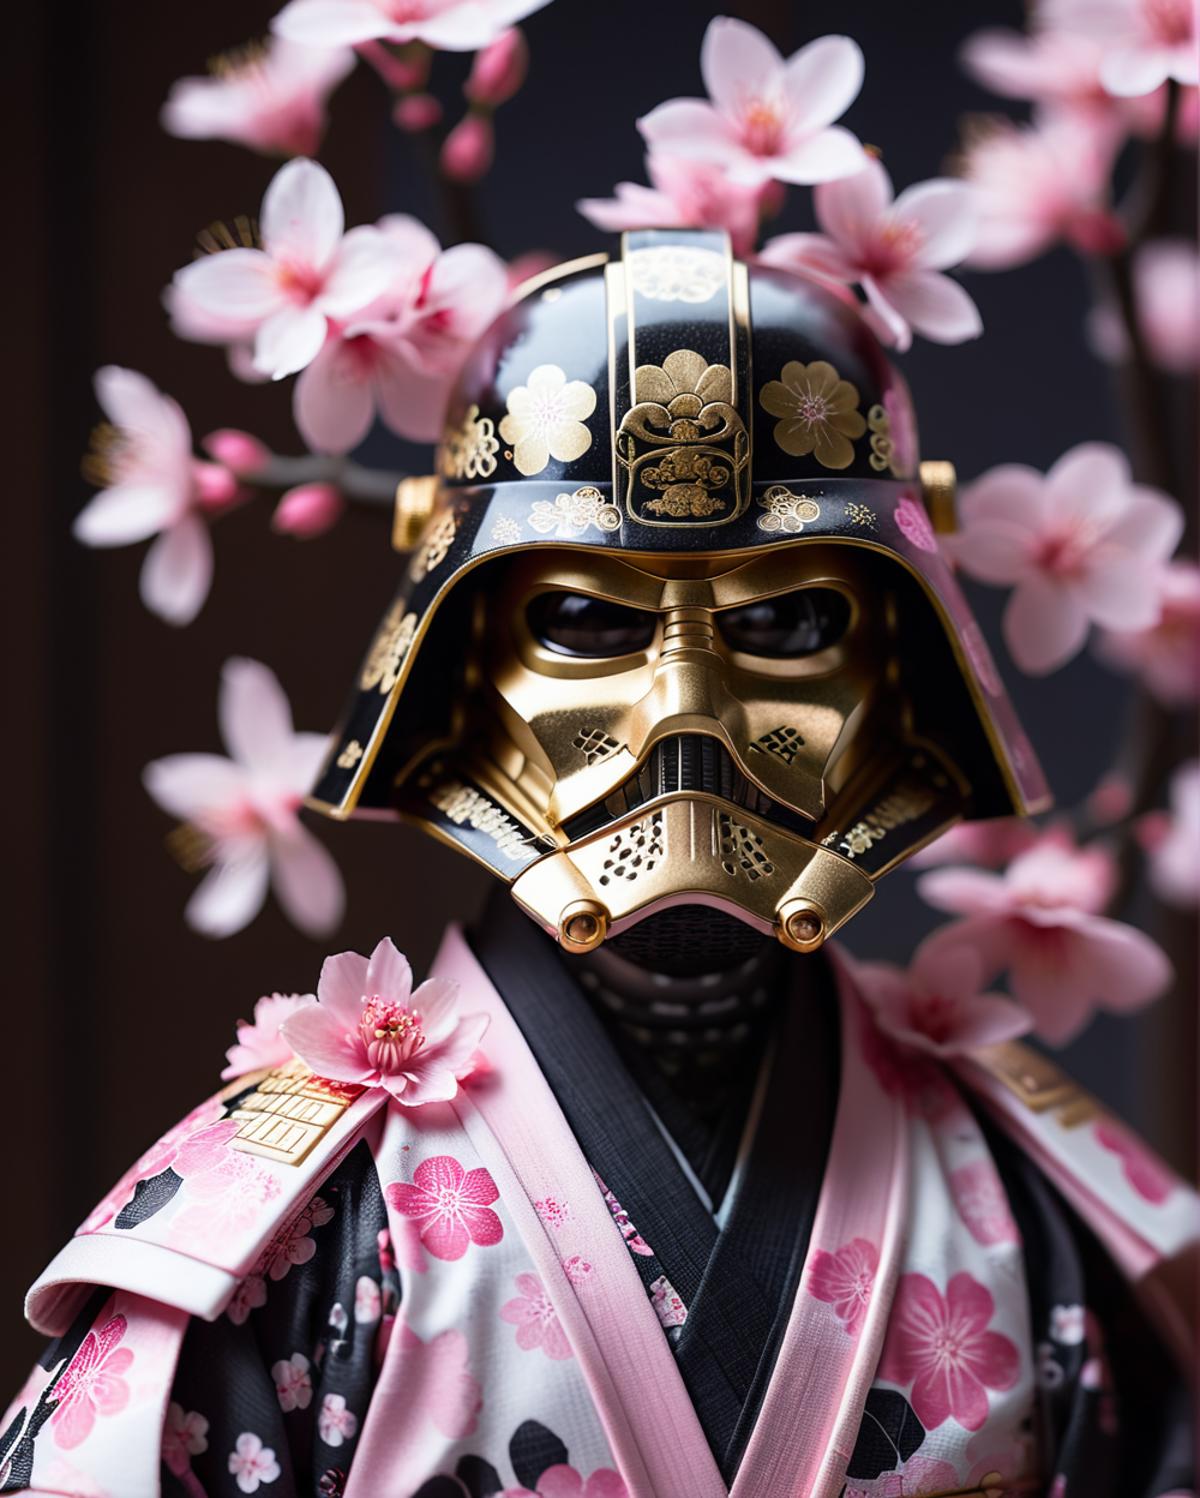 A Japanese doll in a black helmet and pink floral kimono with a flower on top.